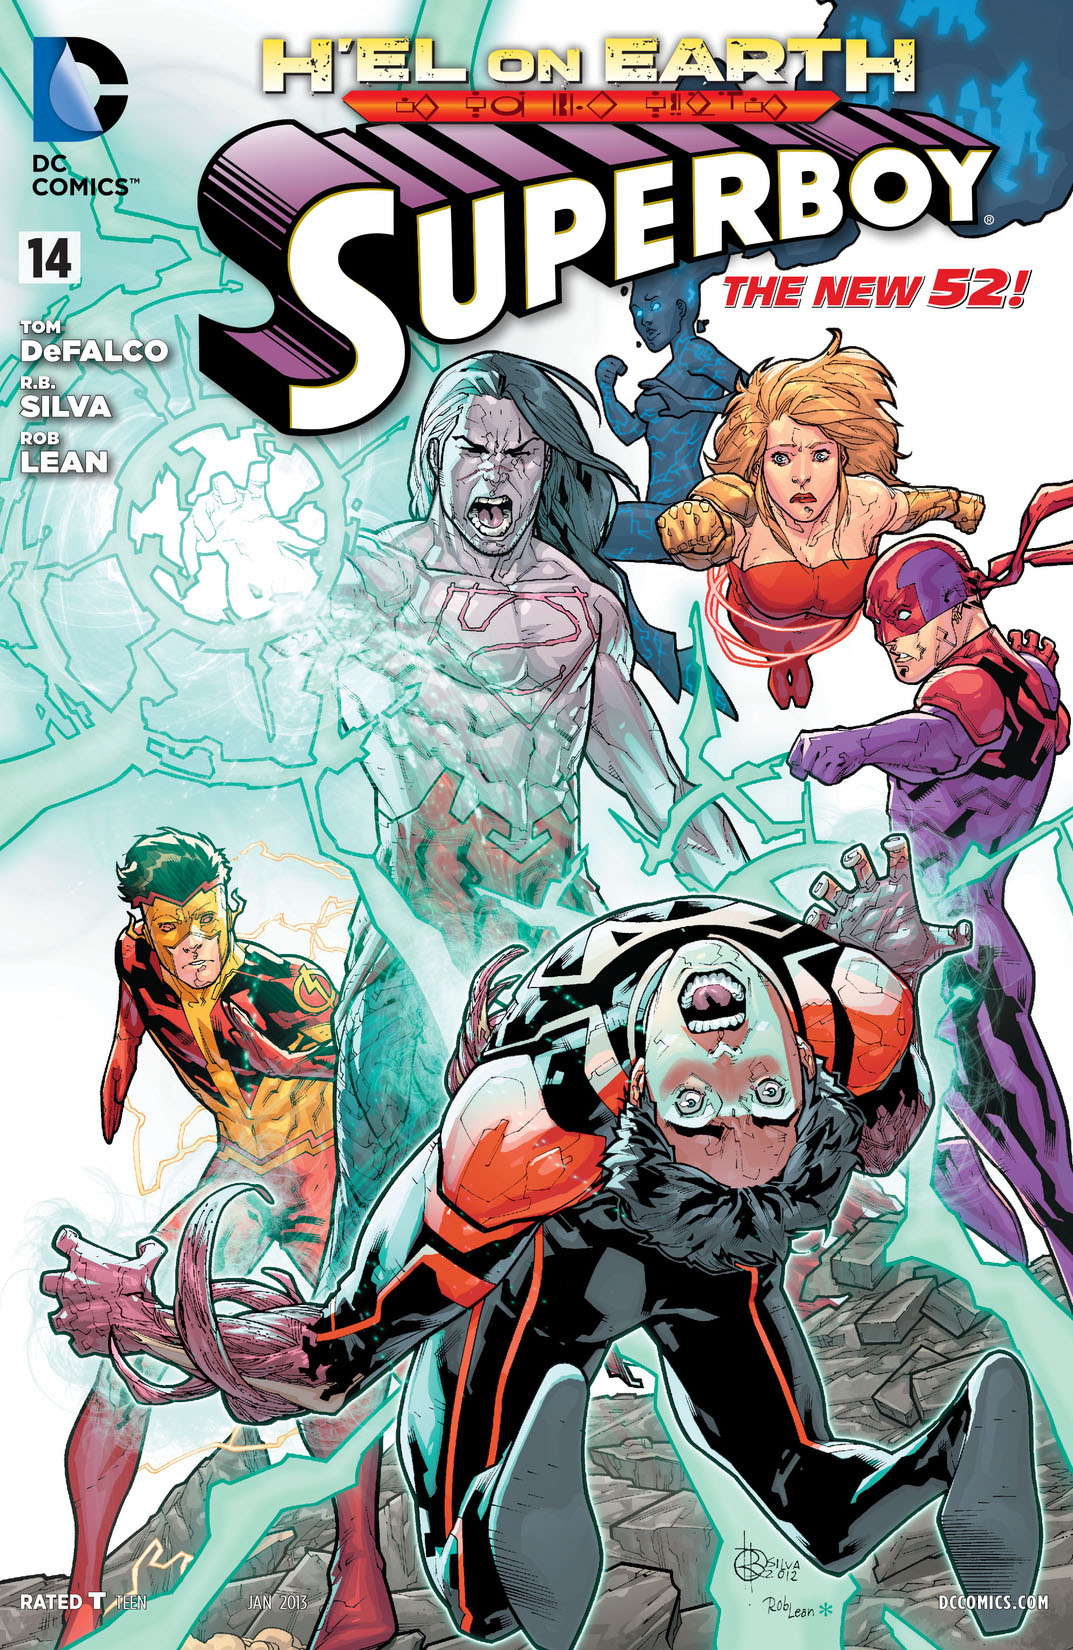 Superboy (2011-) #14 preview images